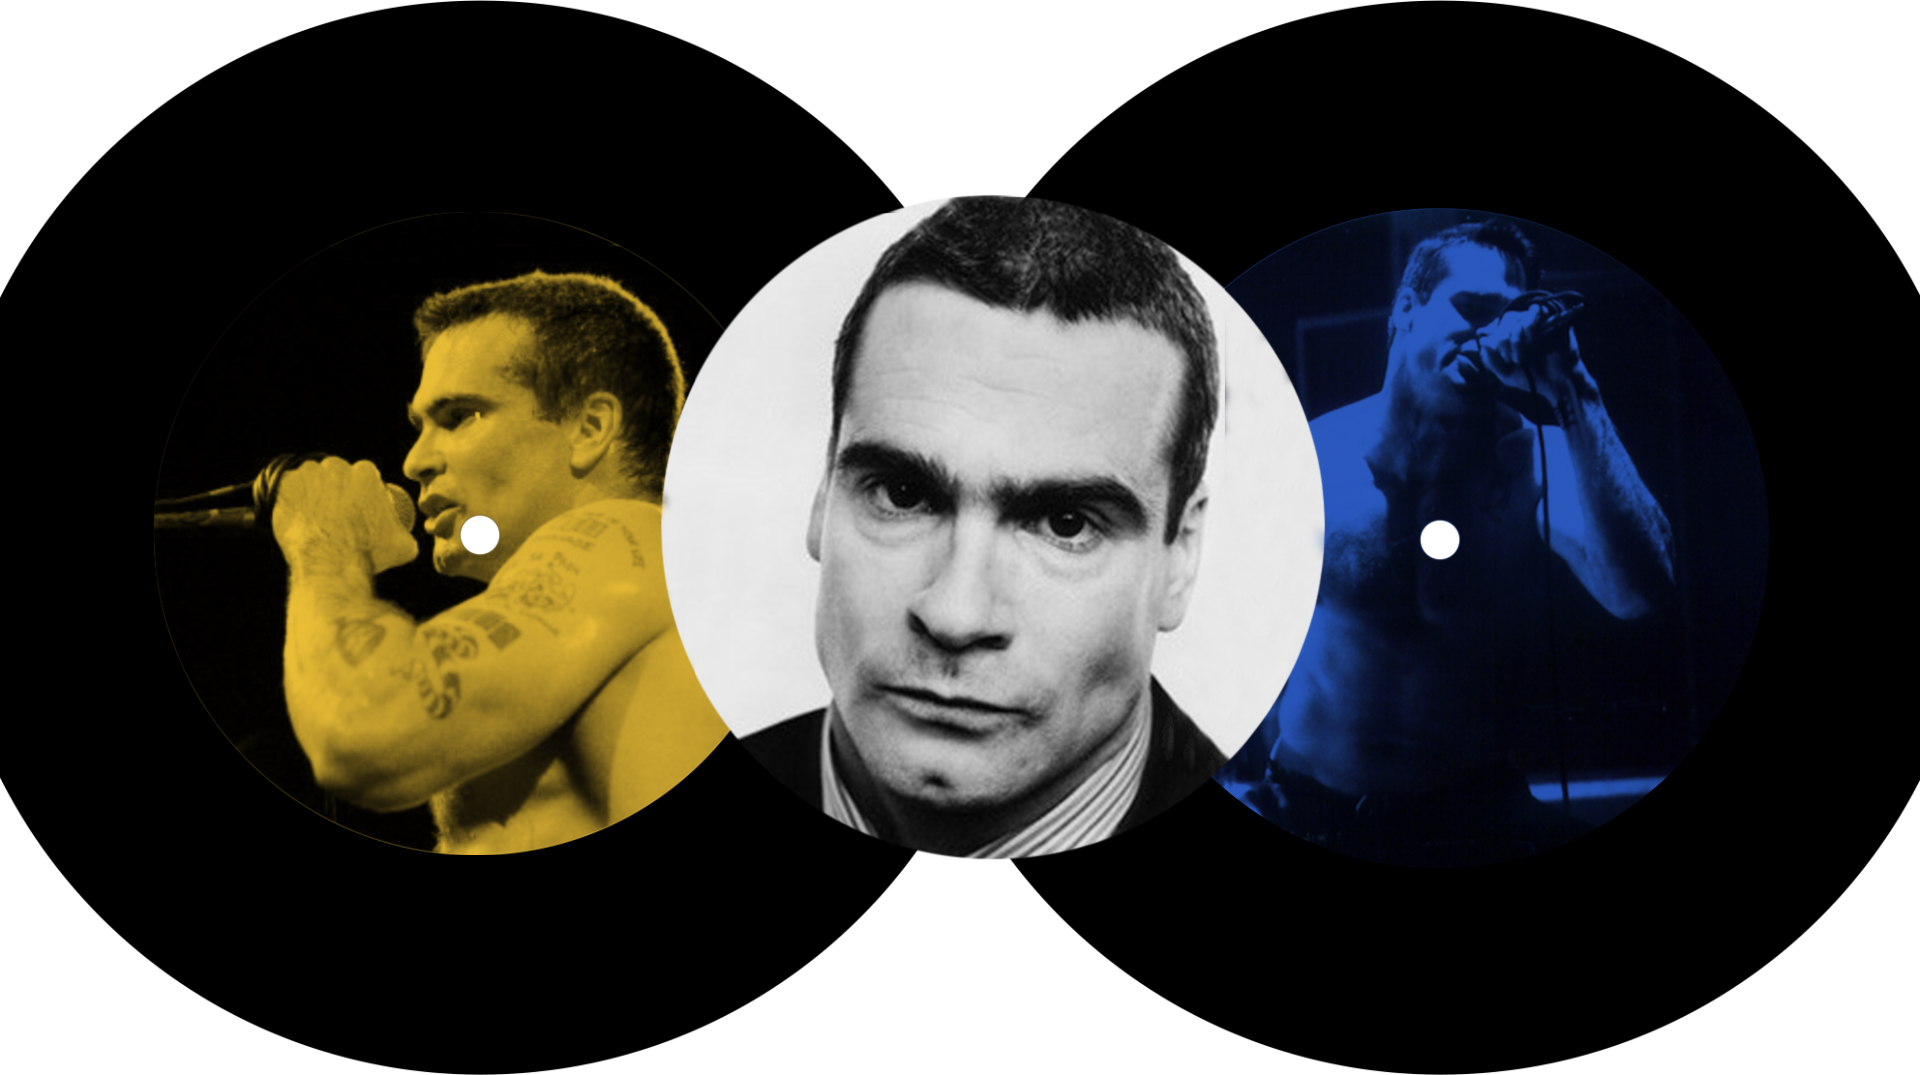 A colorful set of images of Henry Rollins